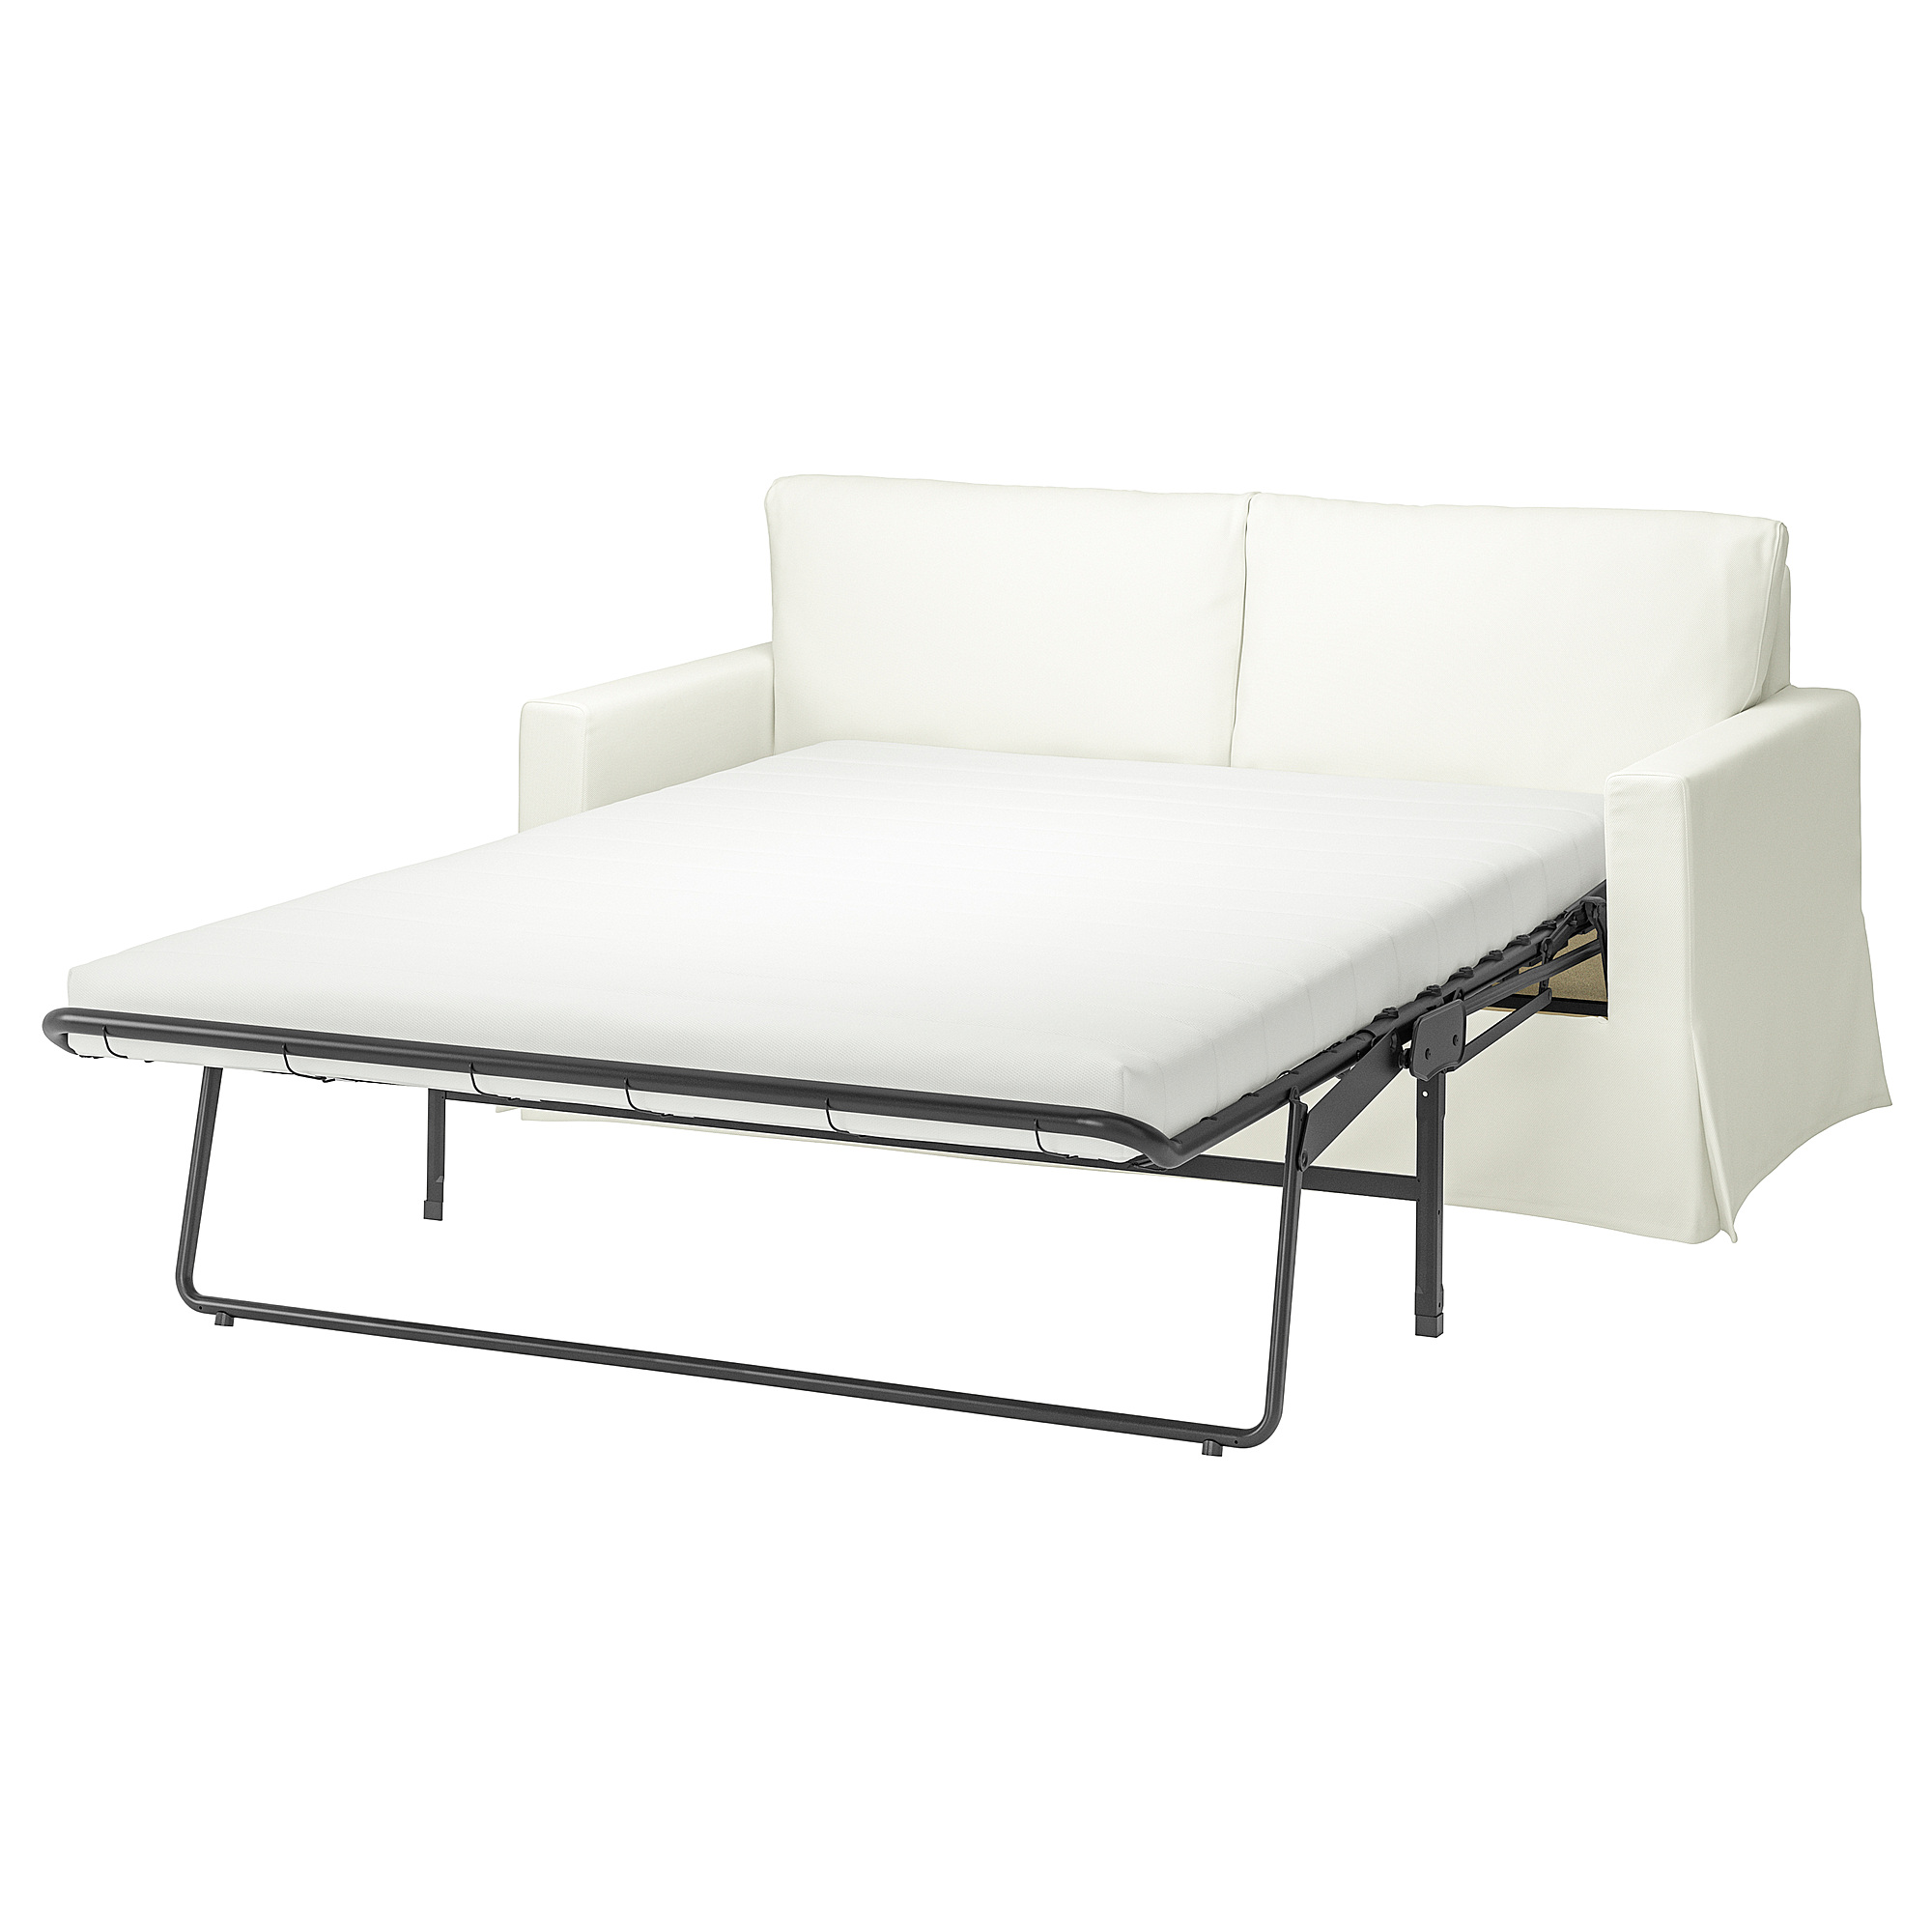 HYLTARP cover for 2-seat sofa-bed